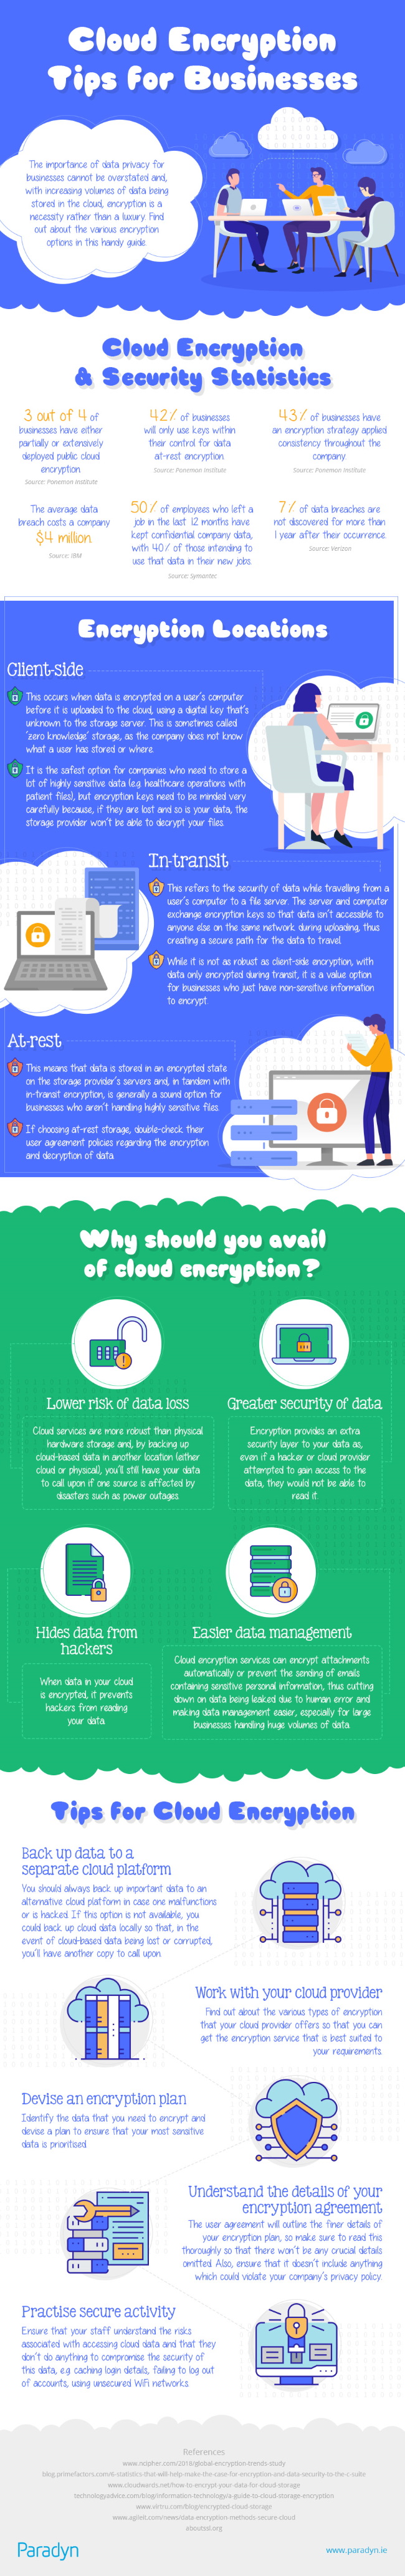 tips for businesses to use cloud encryption security in 2020